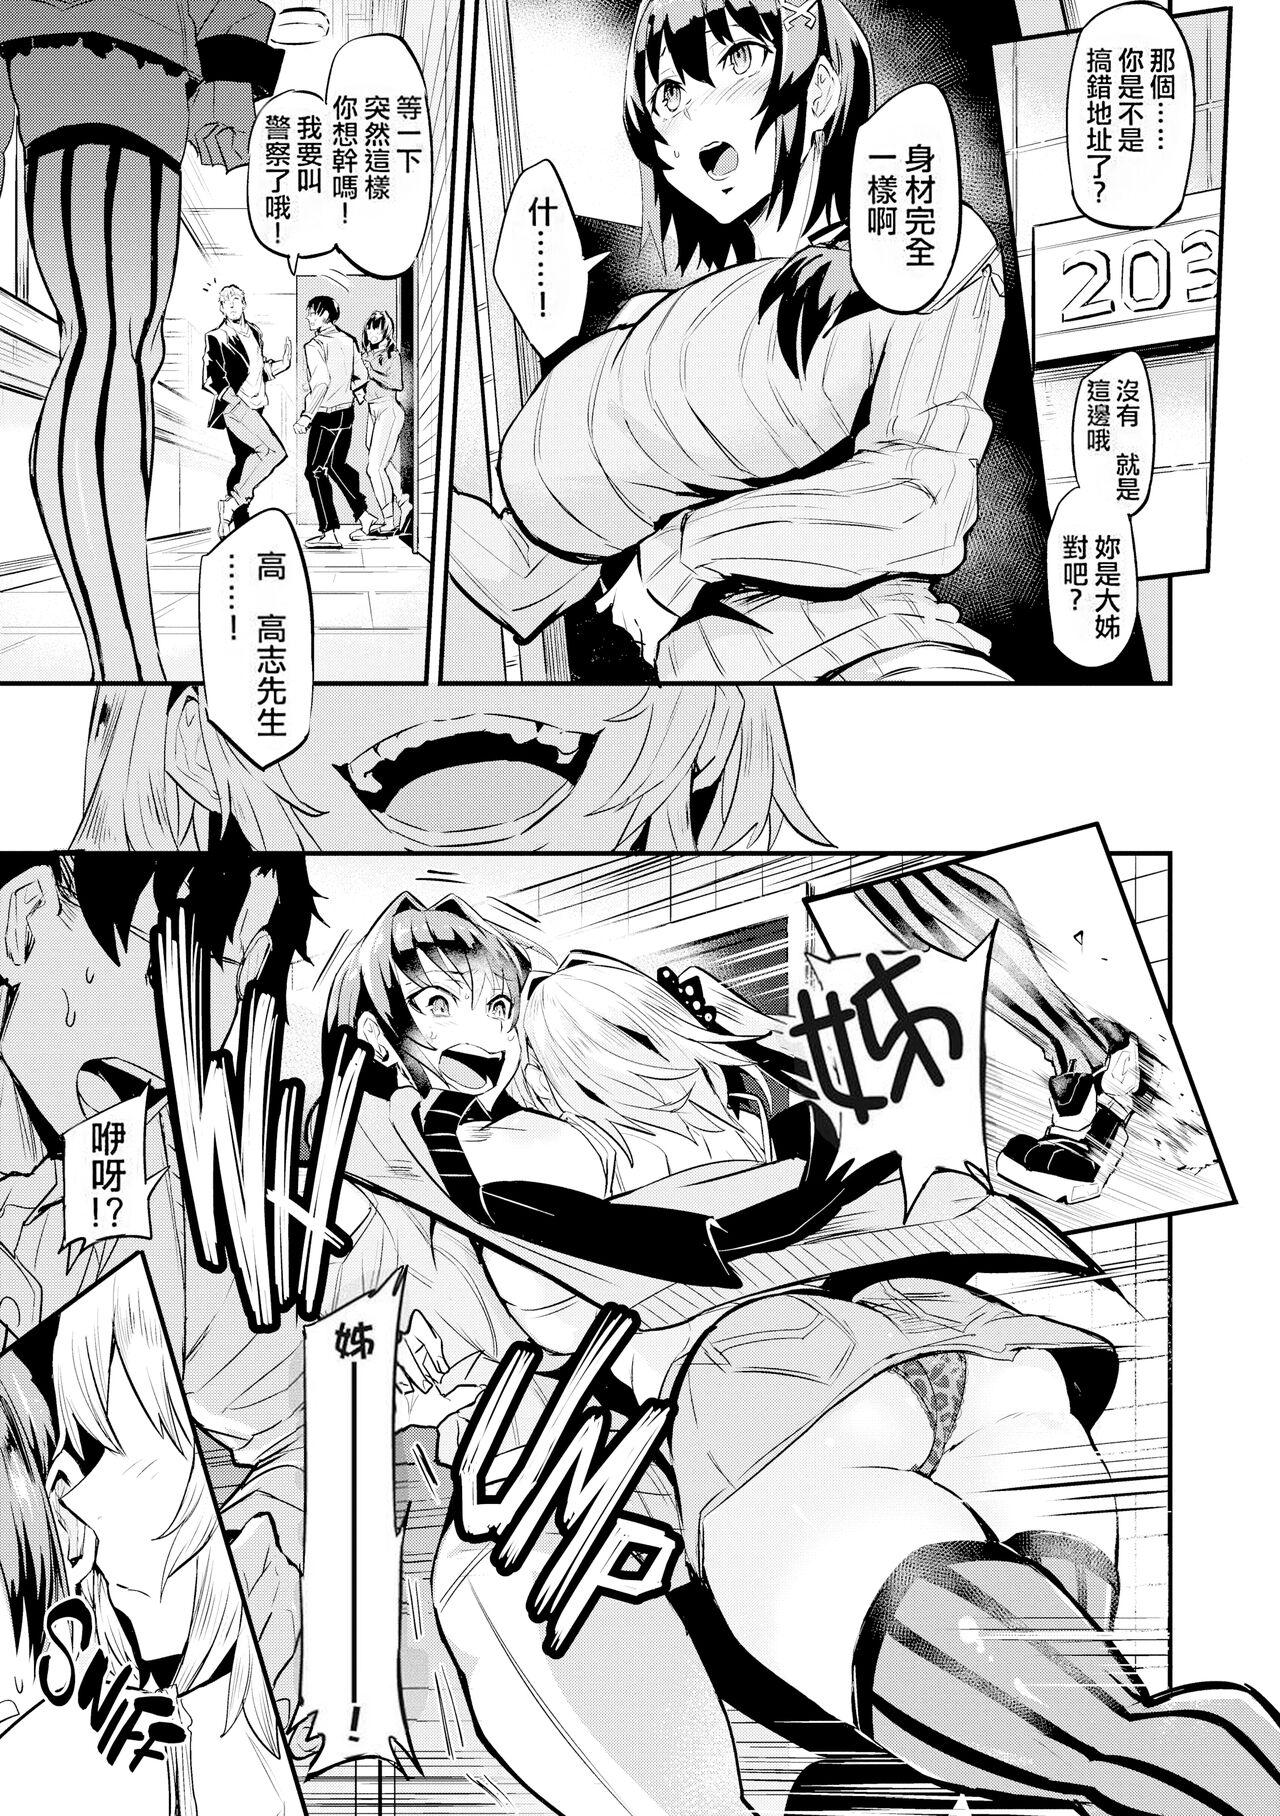 Pussylicking Hitorijime - First Come First Served Yoga - Page 8